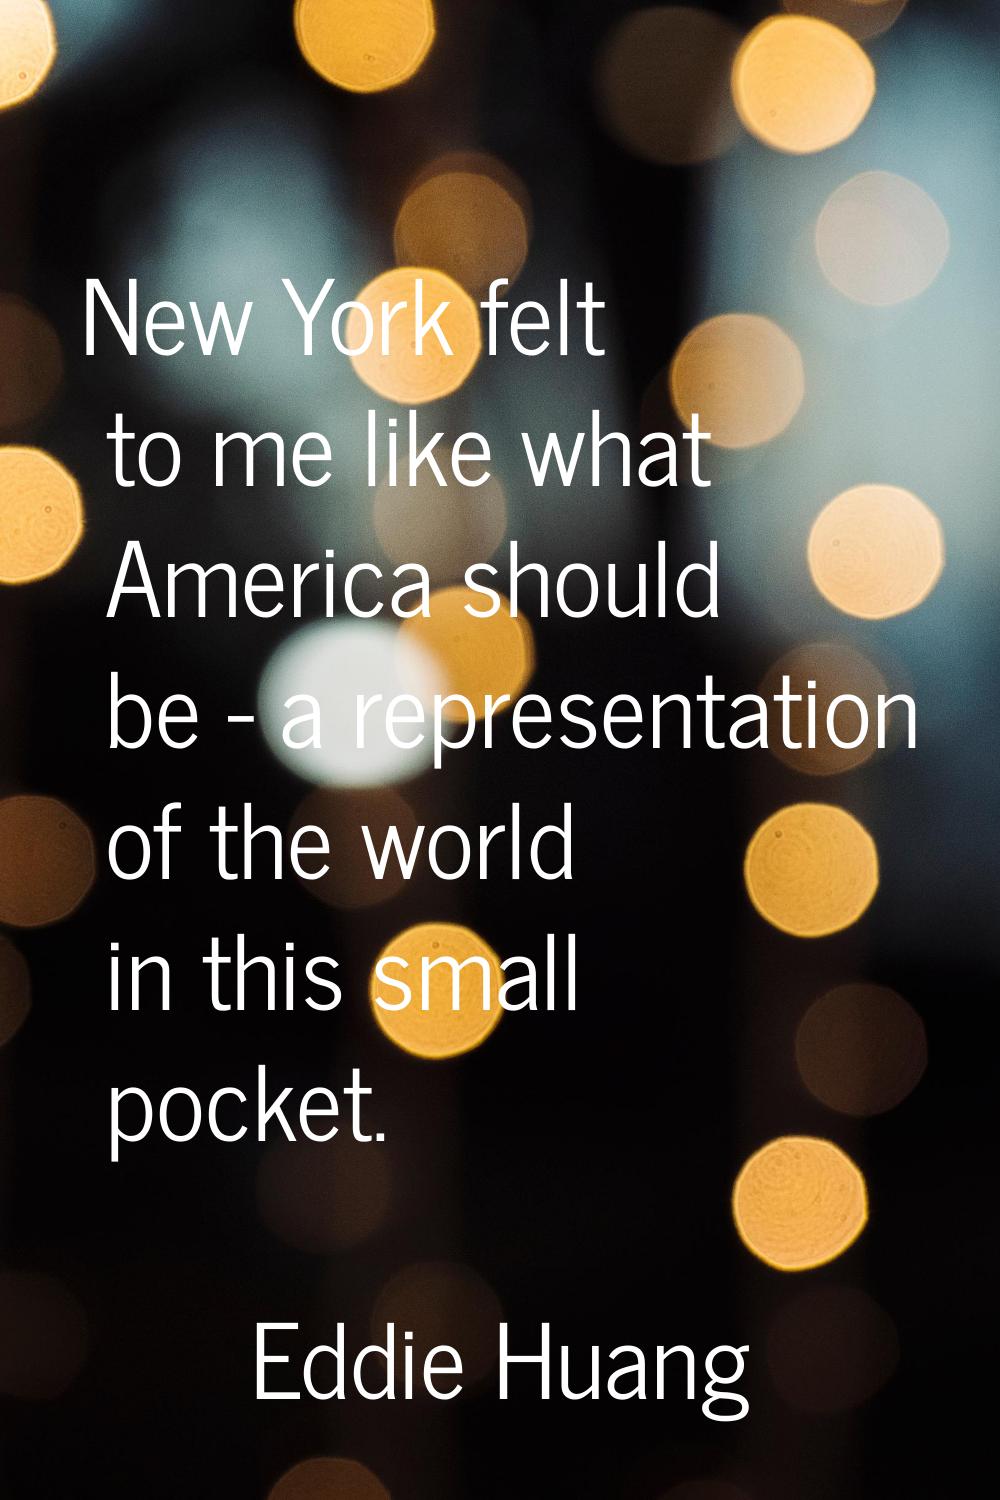 New York felt to me like what America should be - a representation of the world in this small pocke